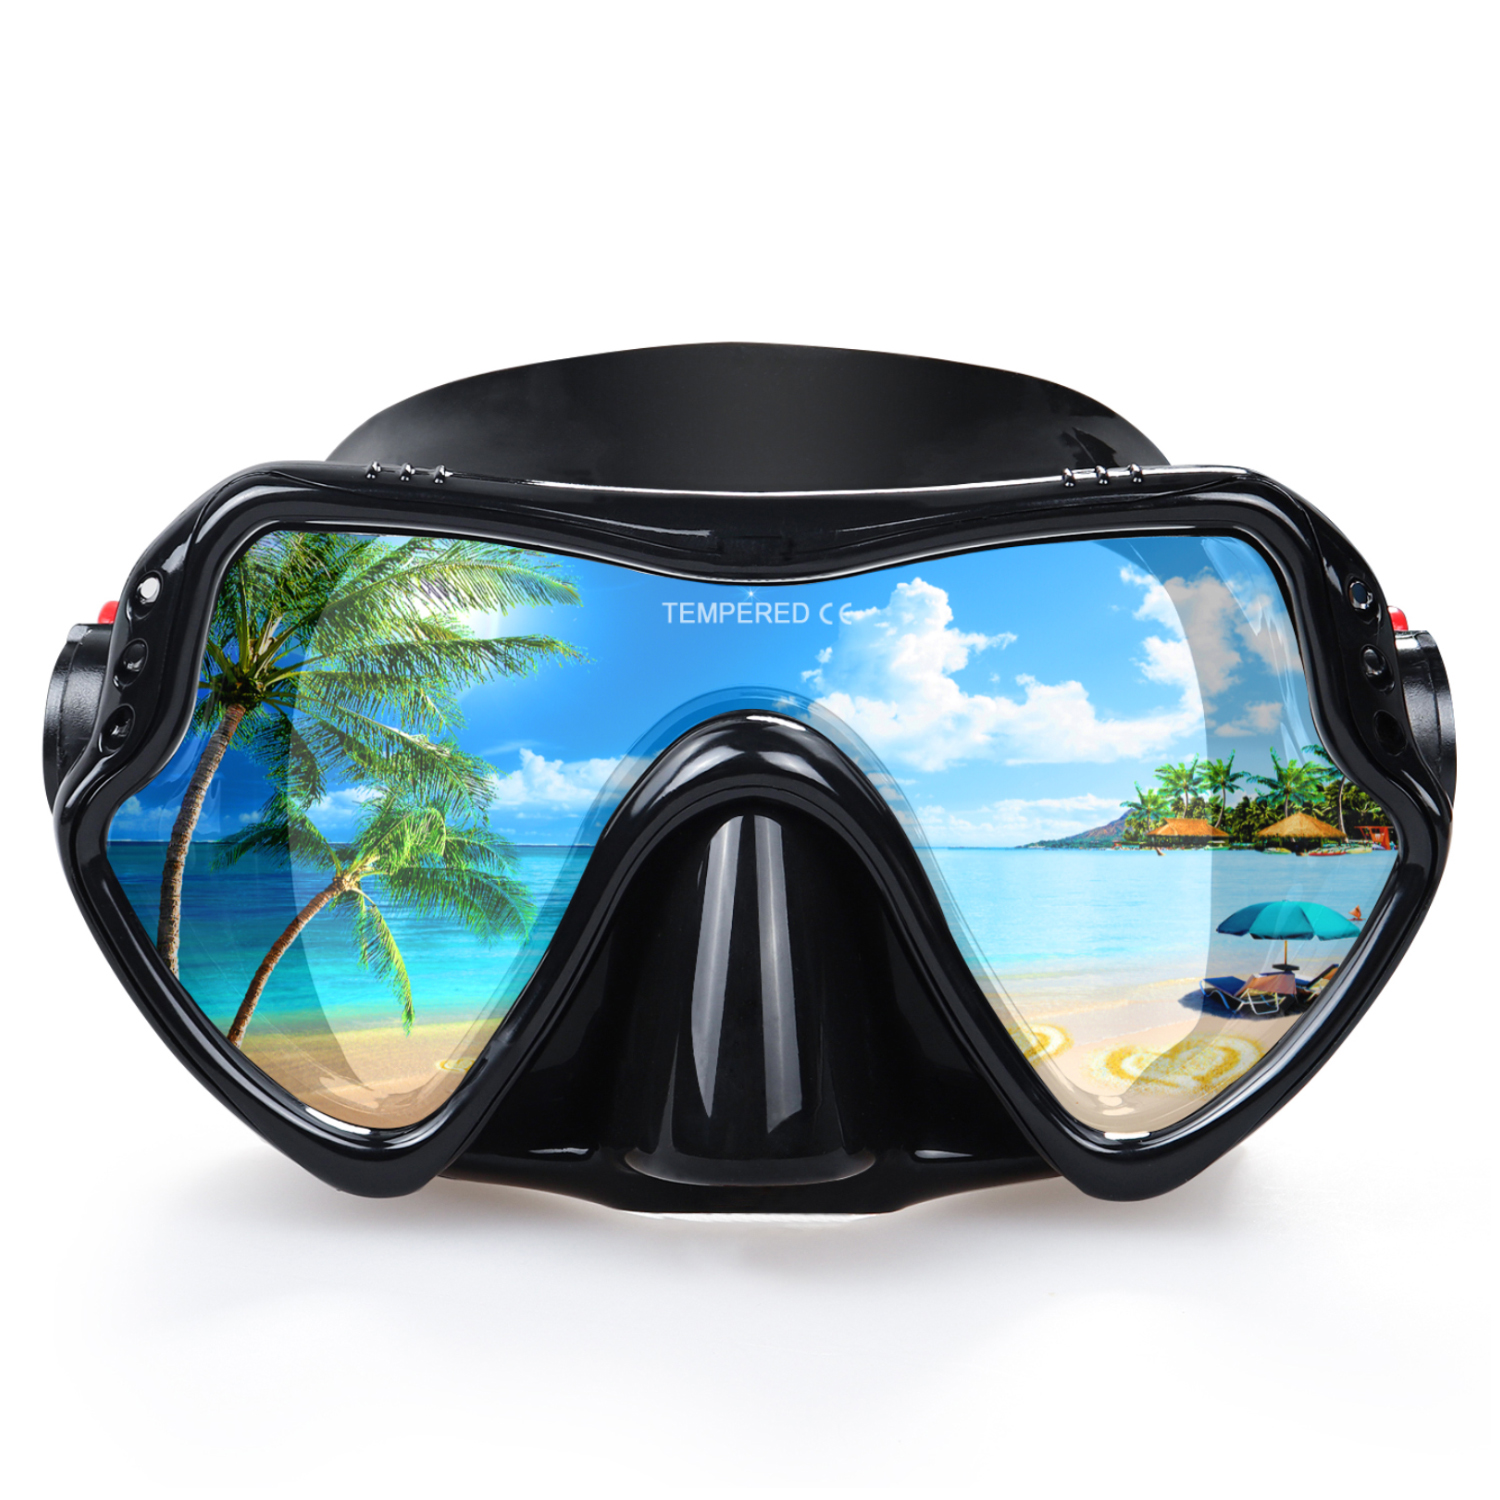 EXP VISION Snorkel Diving Mask, Professional Snorkeling Mask Gear, Ultra Clear Lens with Wide View Tempered Glass Goggles,Anti Leakage Scuba Mask, Silicone Swimming Goggles Mask for Adults